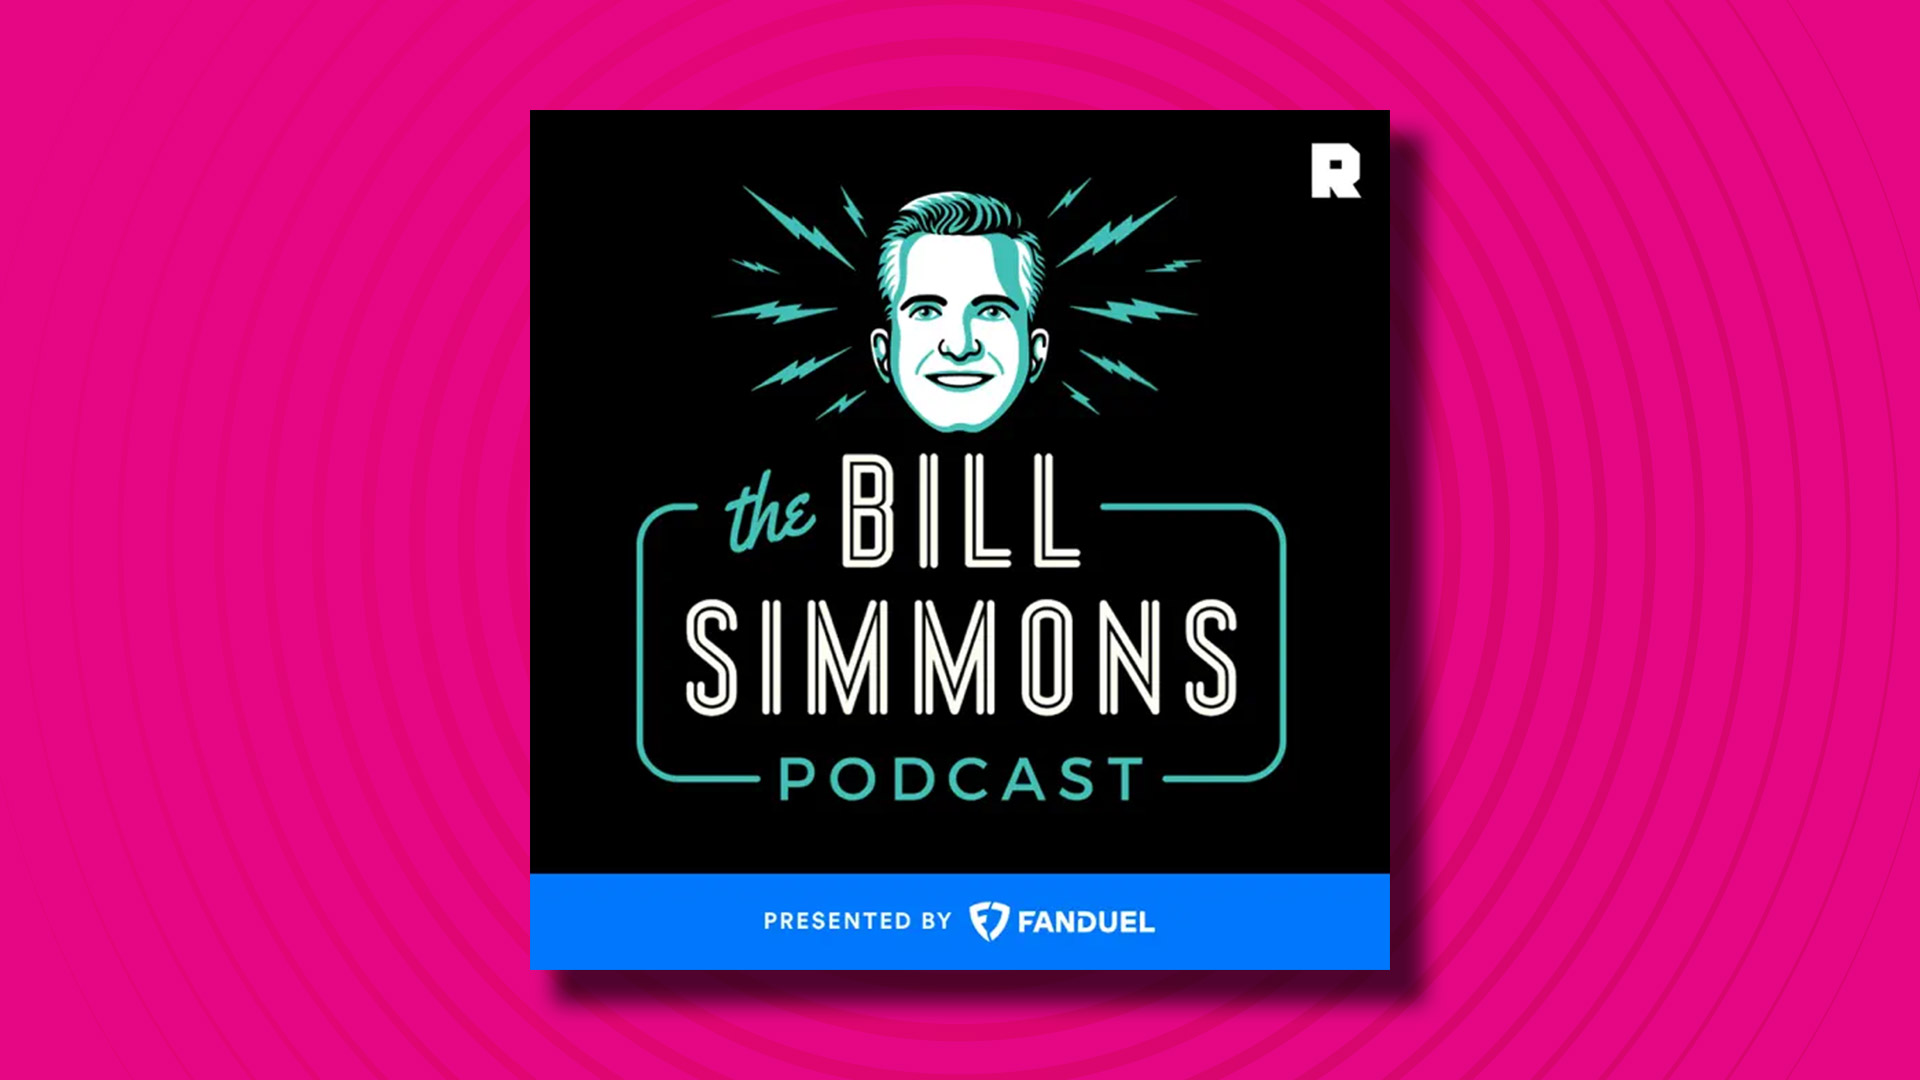 The logo of the Bill Simmons podcast on a pink background